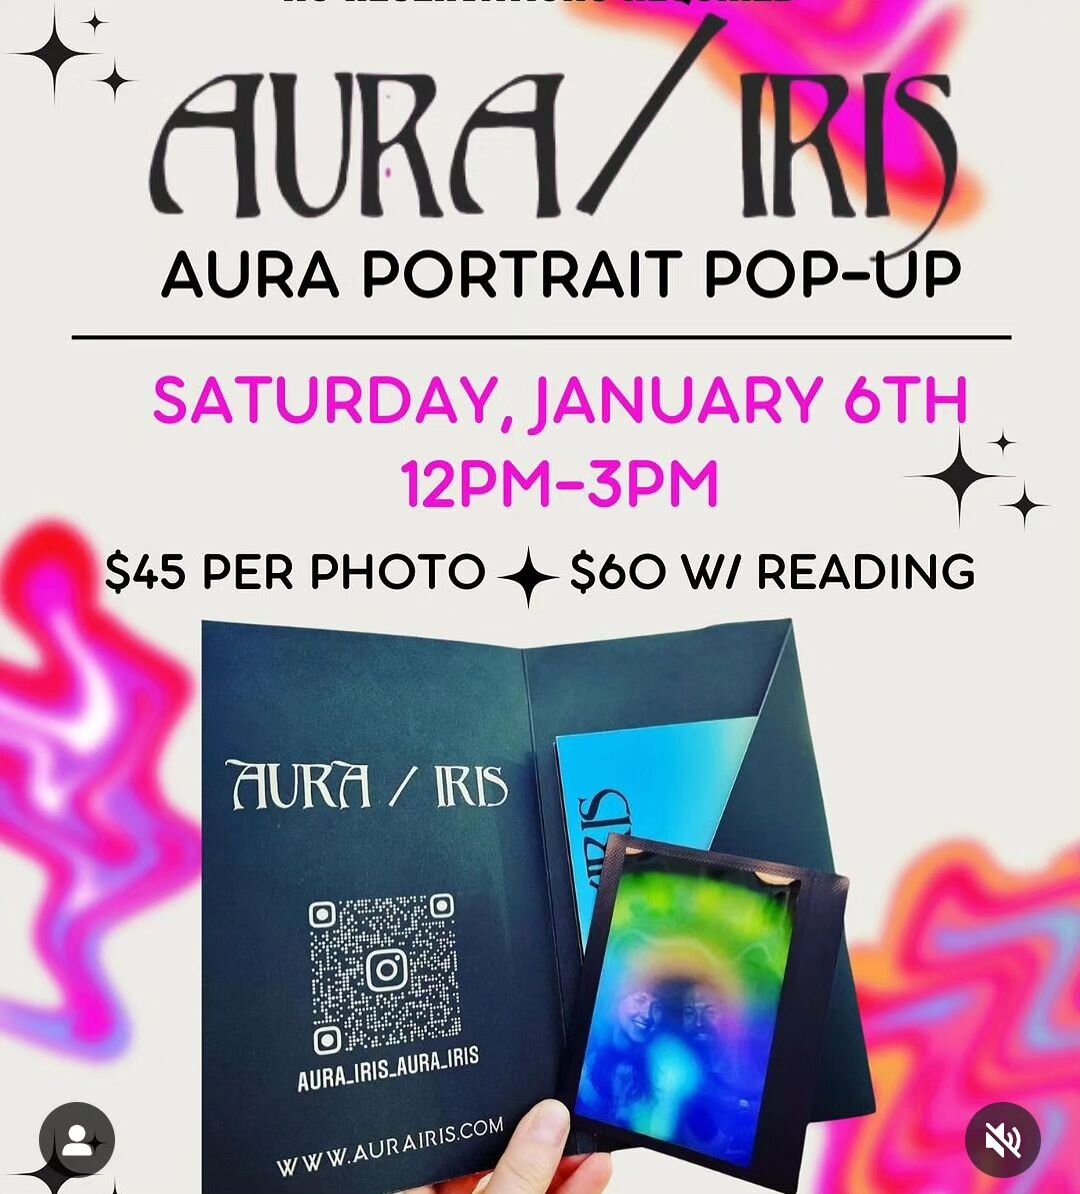 North Chicago Suburbs!!!! 
We're coming to you. 

@lumistudioshoppe invited us to spend a lovely Saturday with them!

What energy are you starting the year with?? Come check it out! 

12-3!!